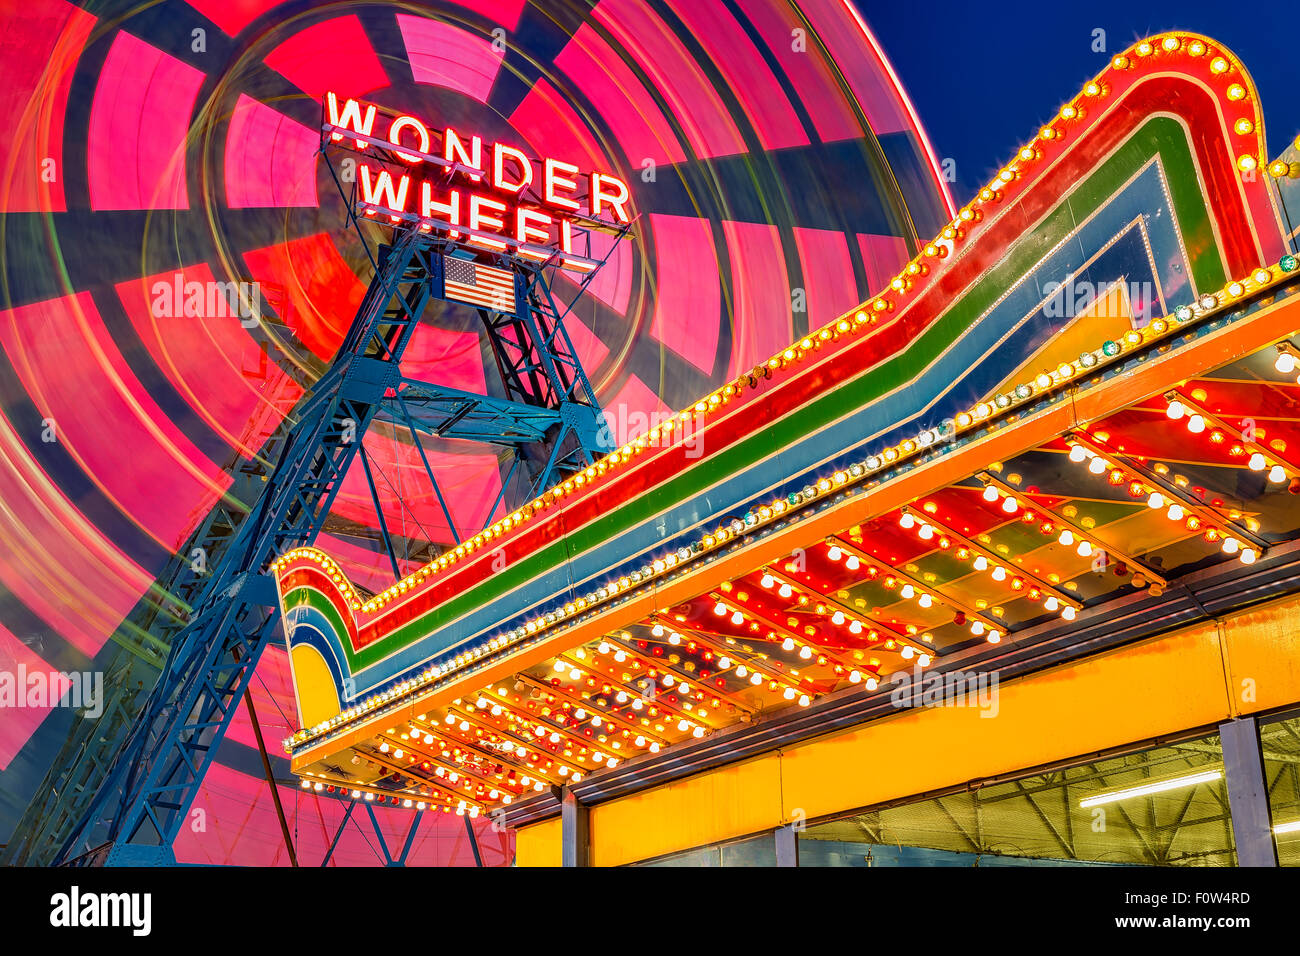 Wonder Wheel At Coney Island - Eccentric  colorful ferris wheel in motion and Illuminated amusement park marquee at the famous landmark Deno's Wonder Wheel Amusement Park at Coney Island in Brooklyn, New York. Stock Photo